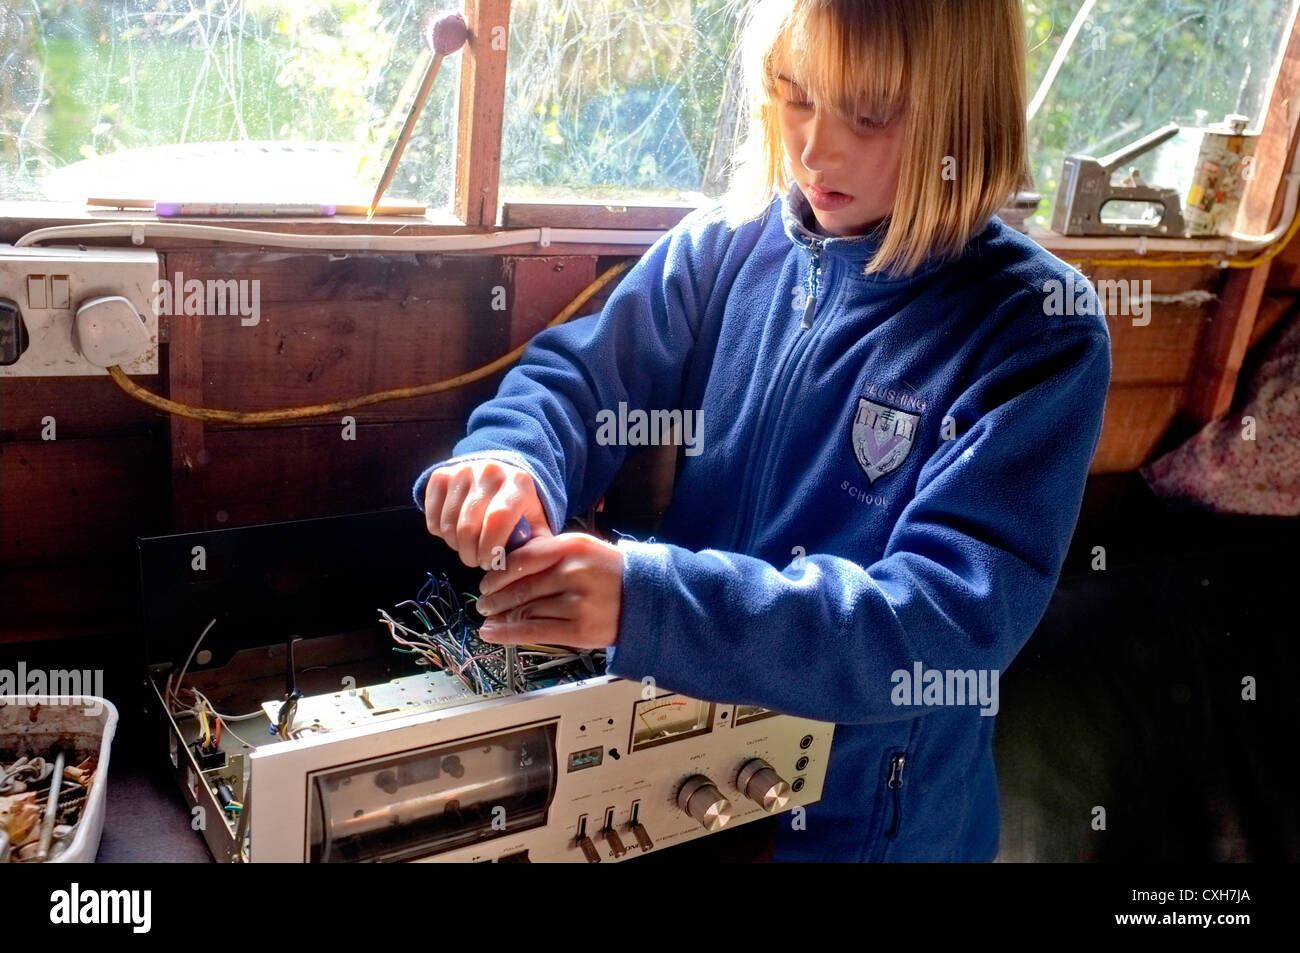 A 10 year old girl takes apart an old cassette player to see how it works Stock Photo